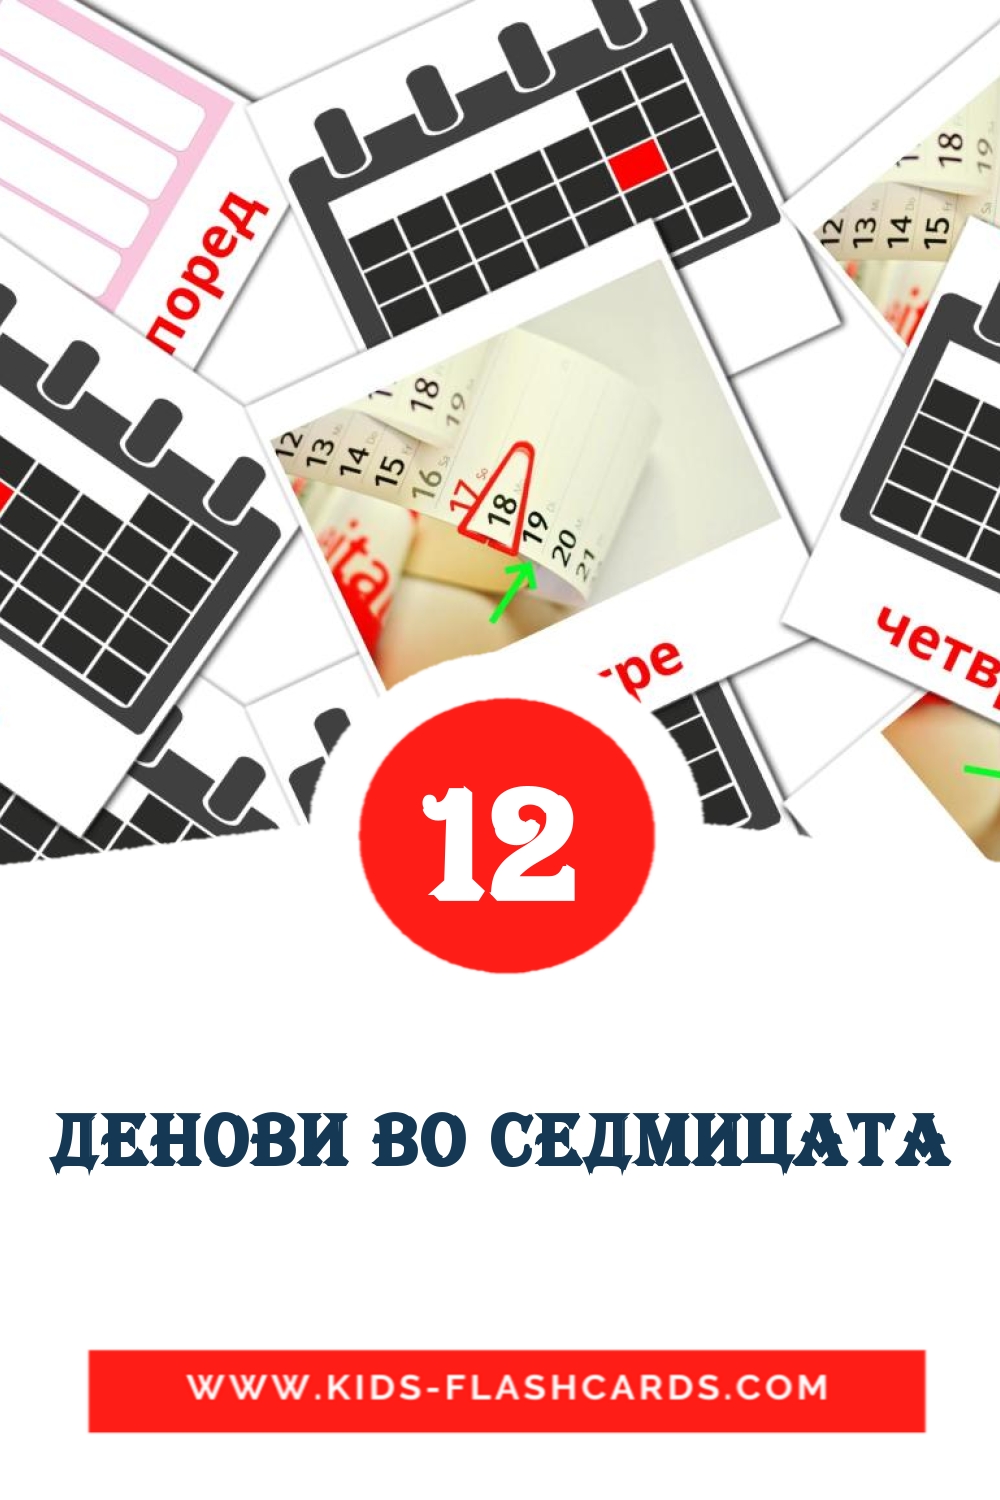 12 Денови во седмицата Picture Cards for Kindergarden in macedonian